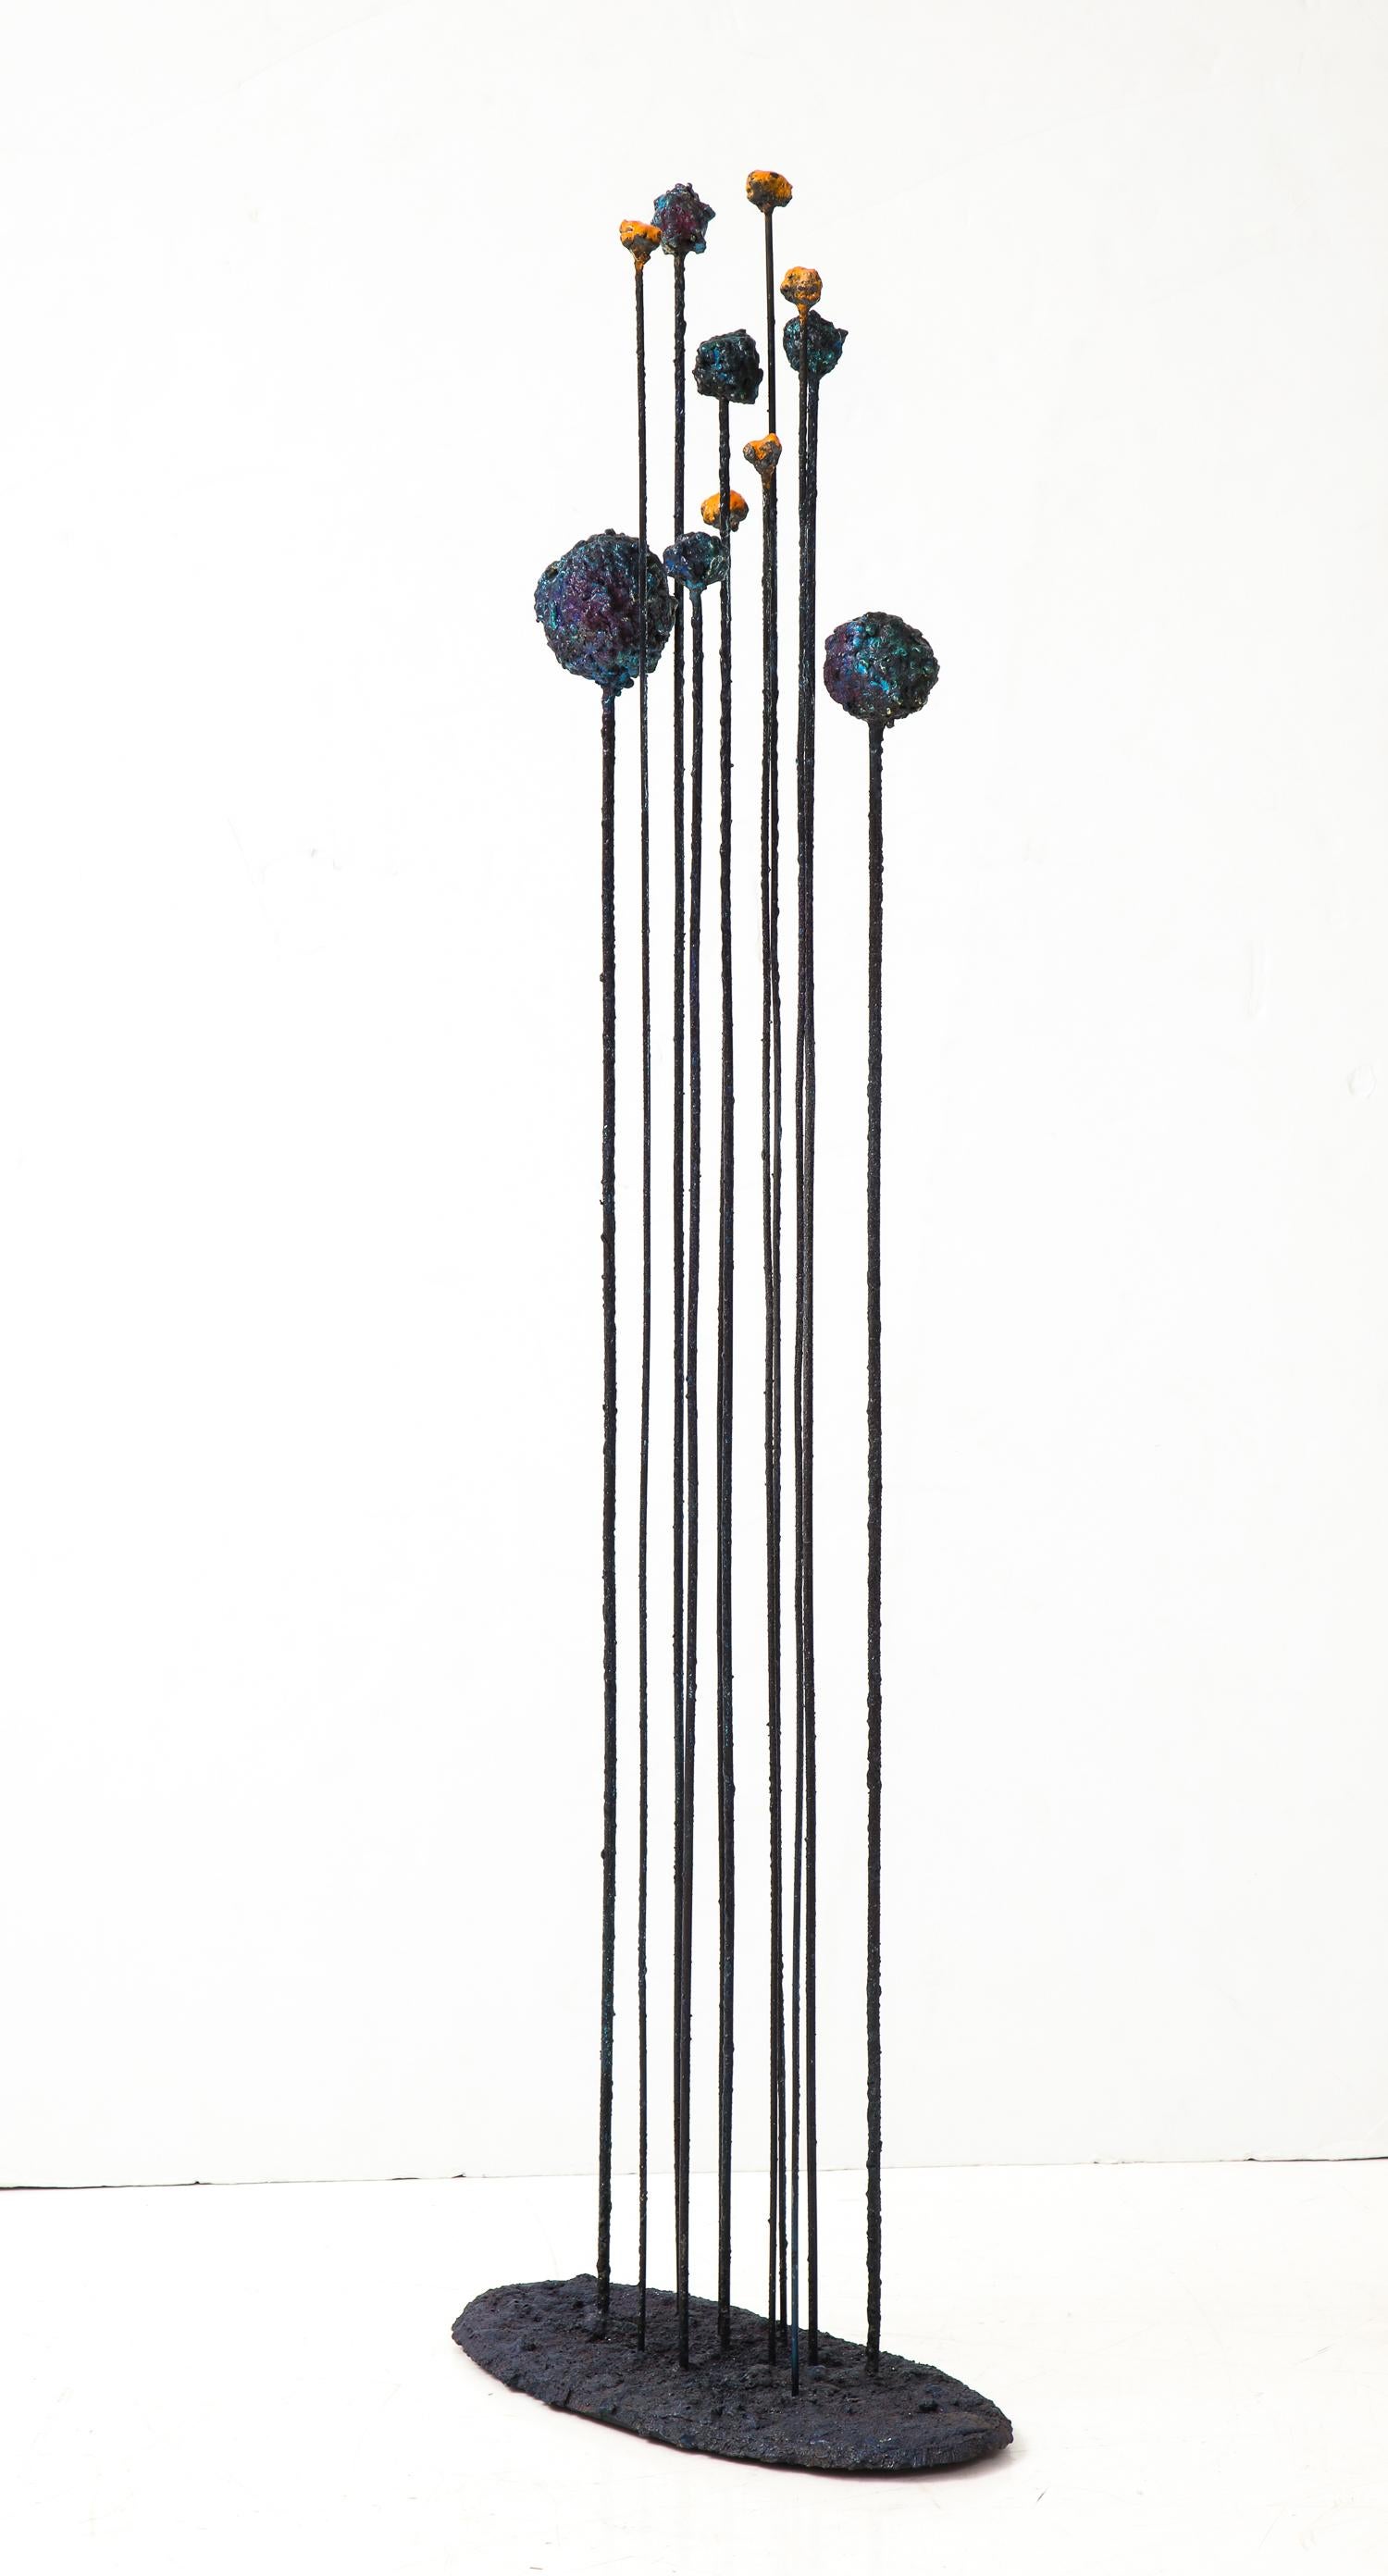 Sonic sculpture of torch-cut steel fused with glass enamel titled “Meteor Storm” by American artist James Bearden. The array of iridescent, molten-looking celestial shapes surmounting slender rods has the aspect of a cosmic event; set in motion with